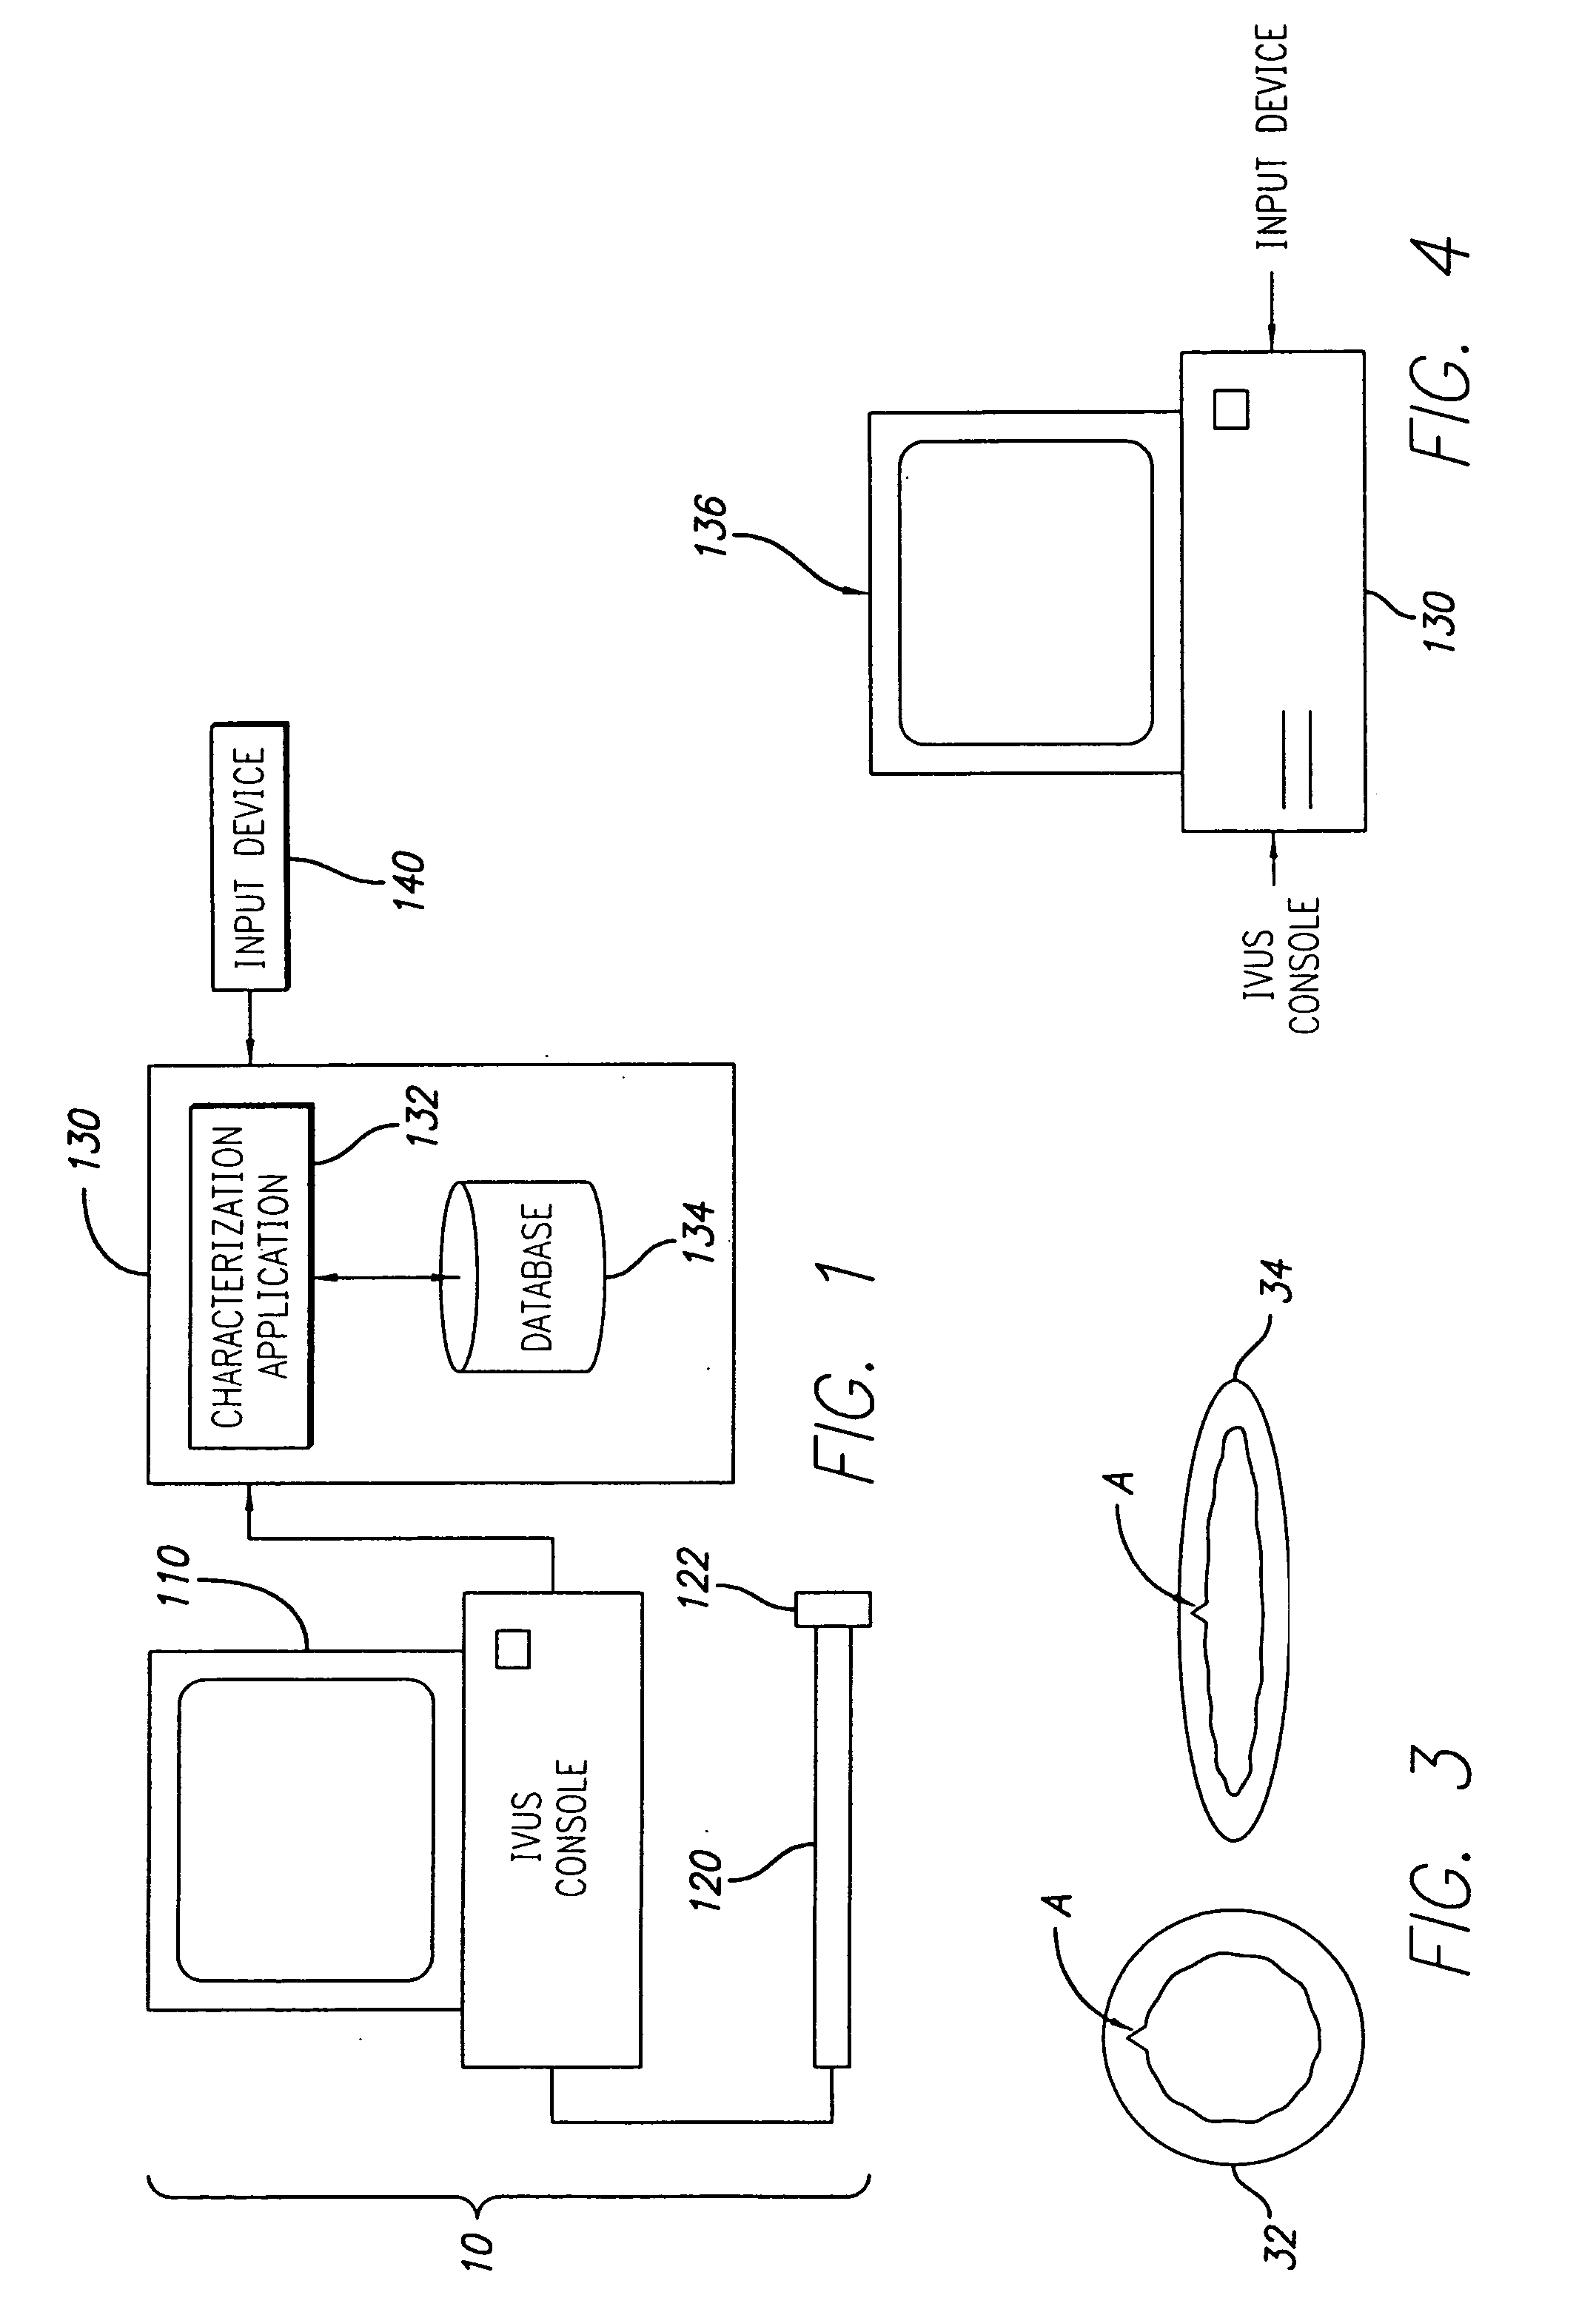 System and method of characterizing vascular tissue